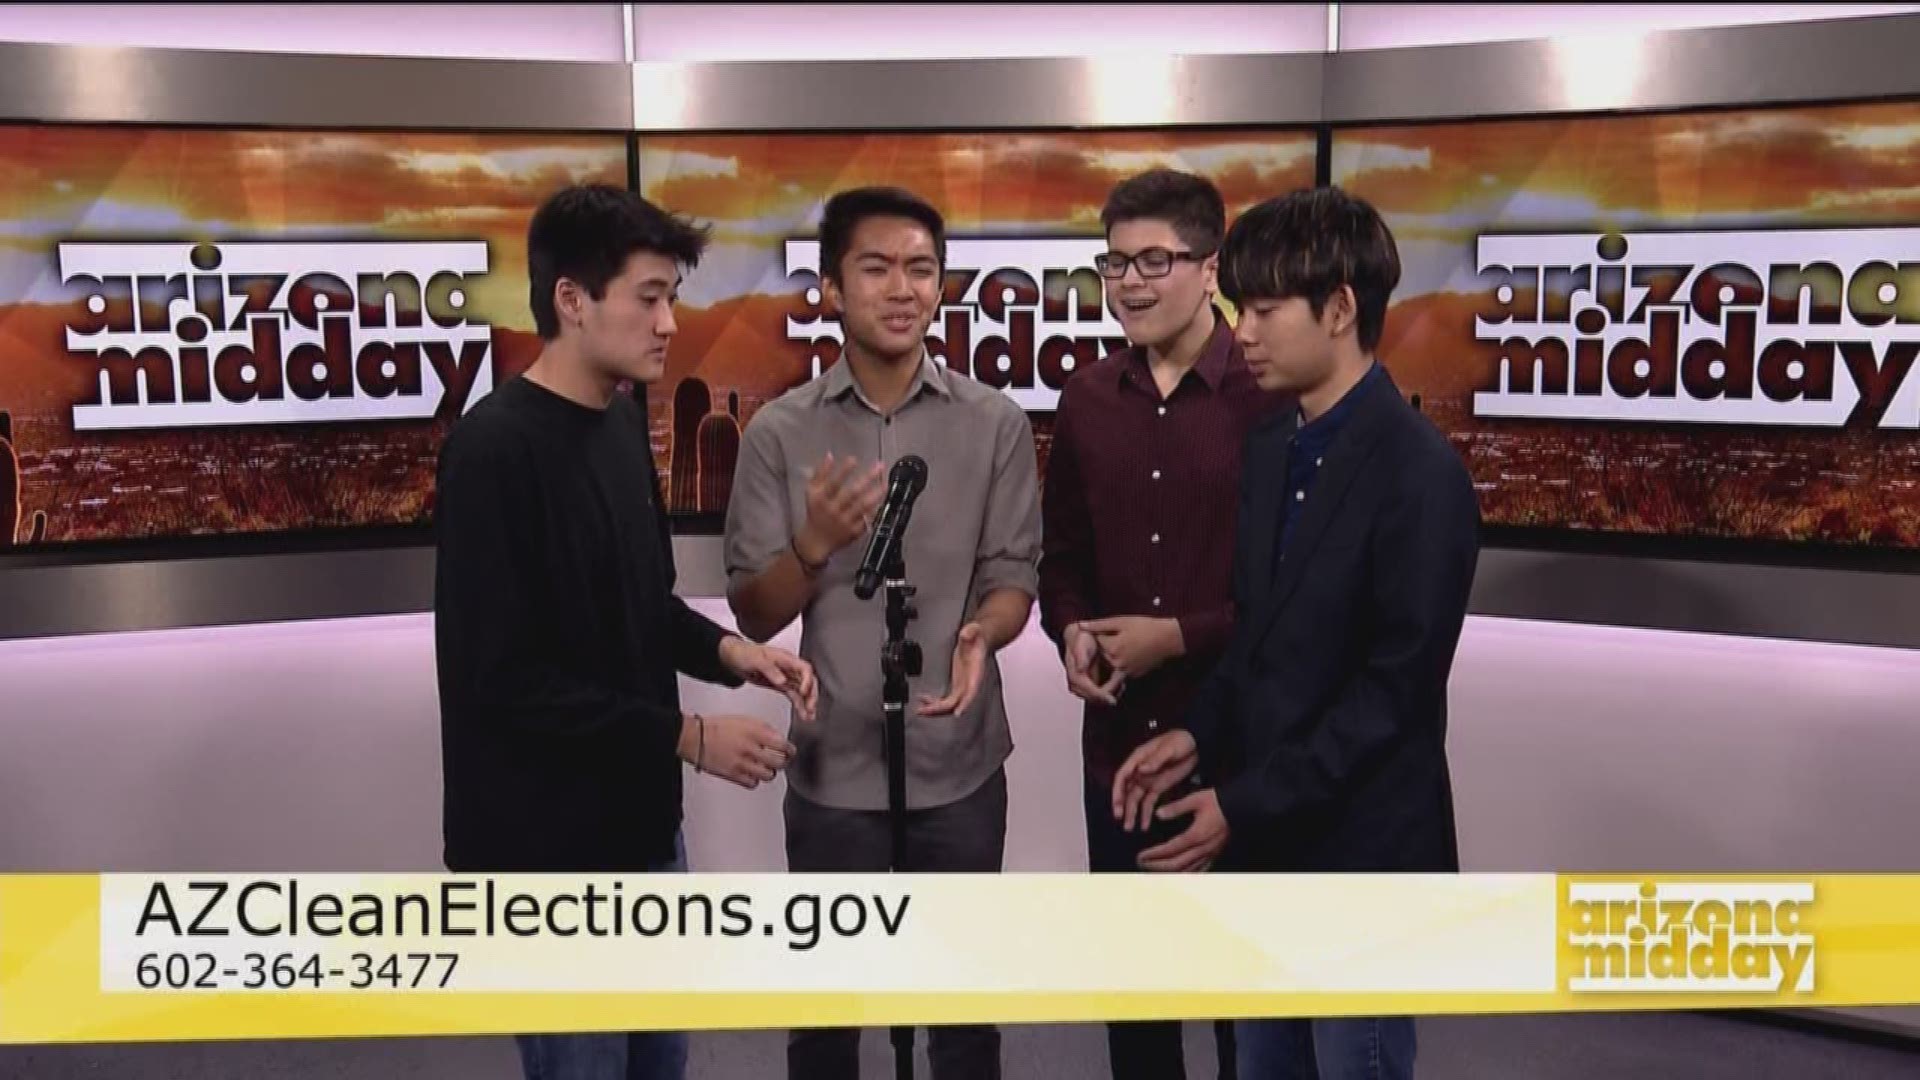 Tom Collins, Derek Rinsema and The Mixtones show us how they are inspiring everyone to vote this election season with a special in-studio show!